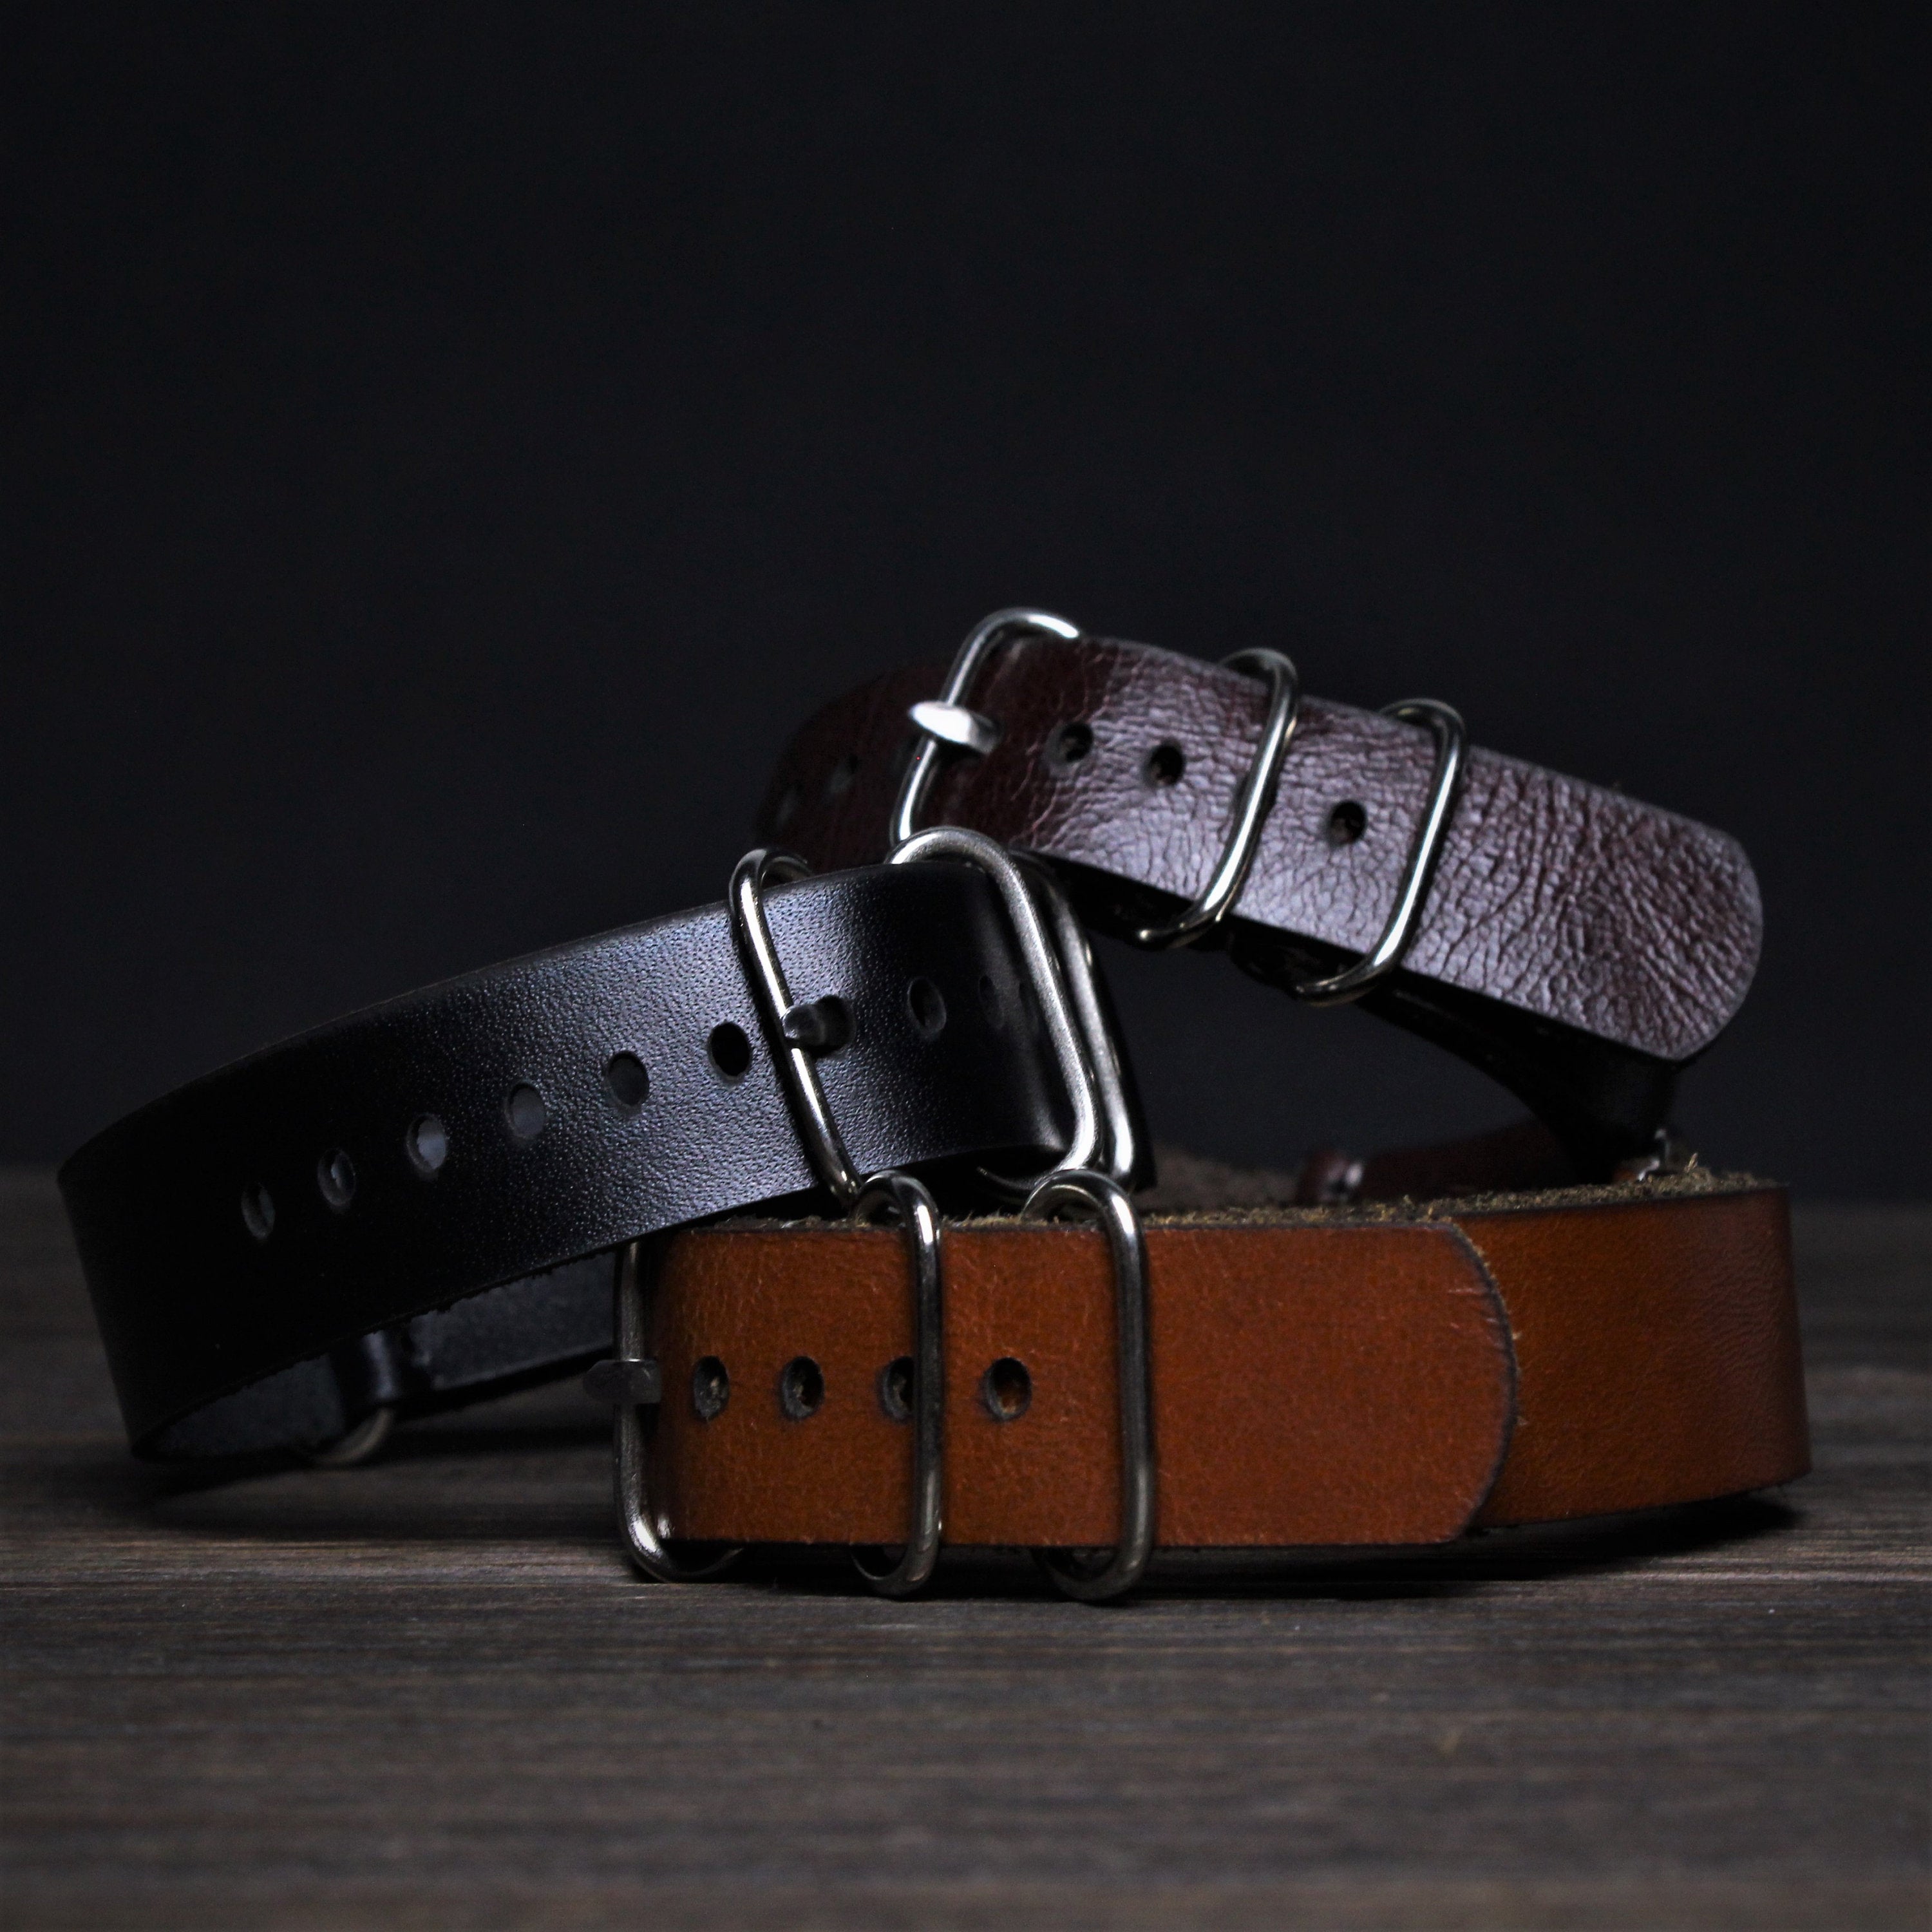 Leather Strap 18 mm, leather strap, watches strap, vintage style strap, leather strap, watch band, Brown strap